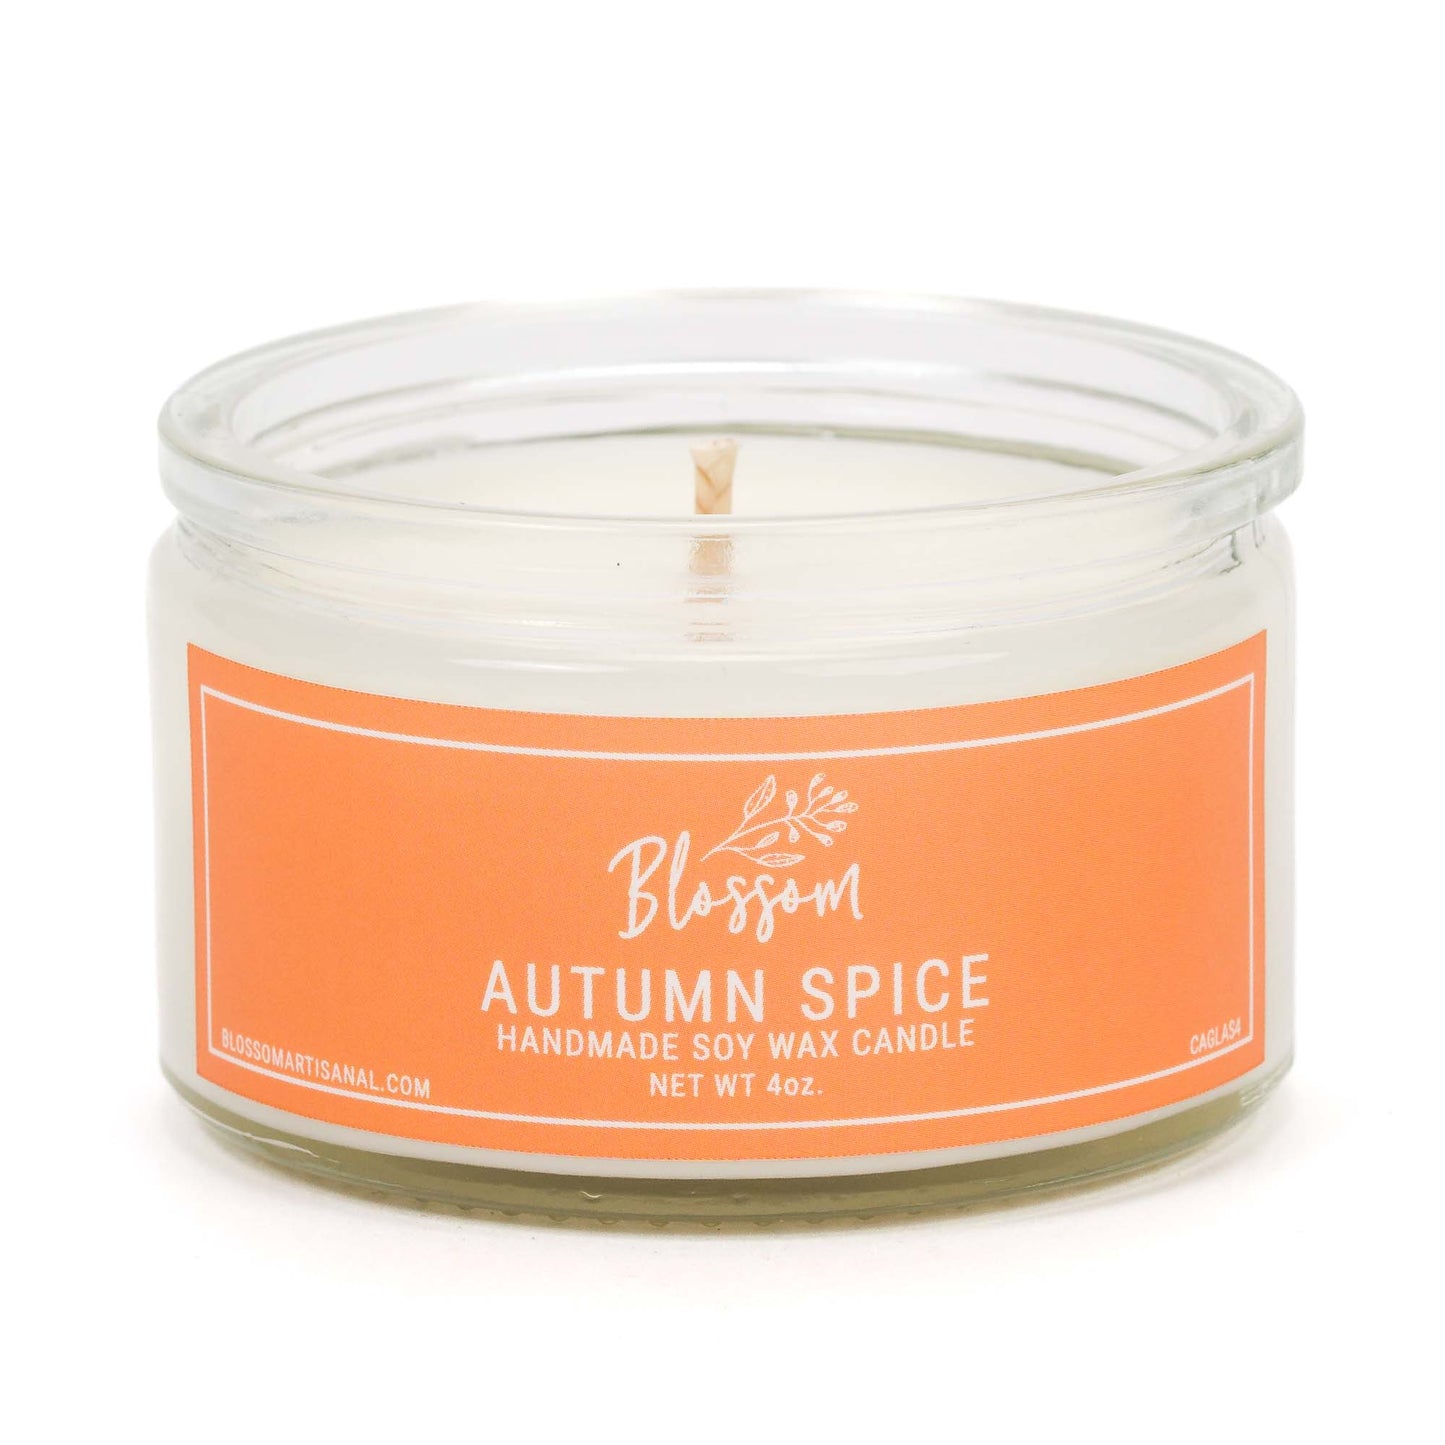 Autumn Spice 4 oz. Glass Soy Wax Candle